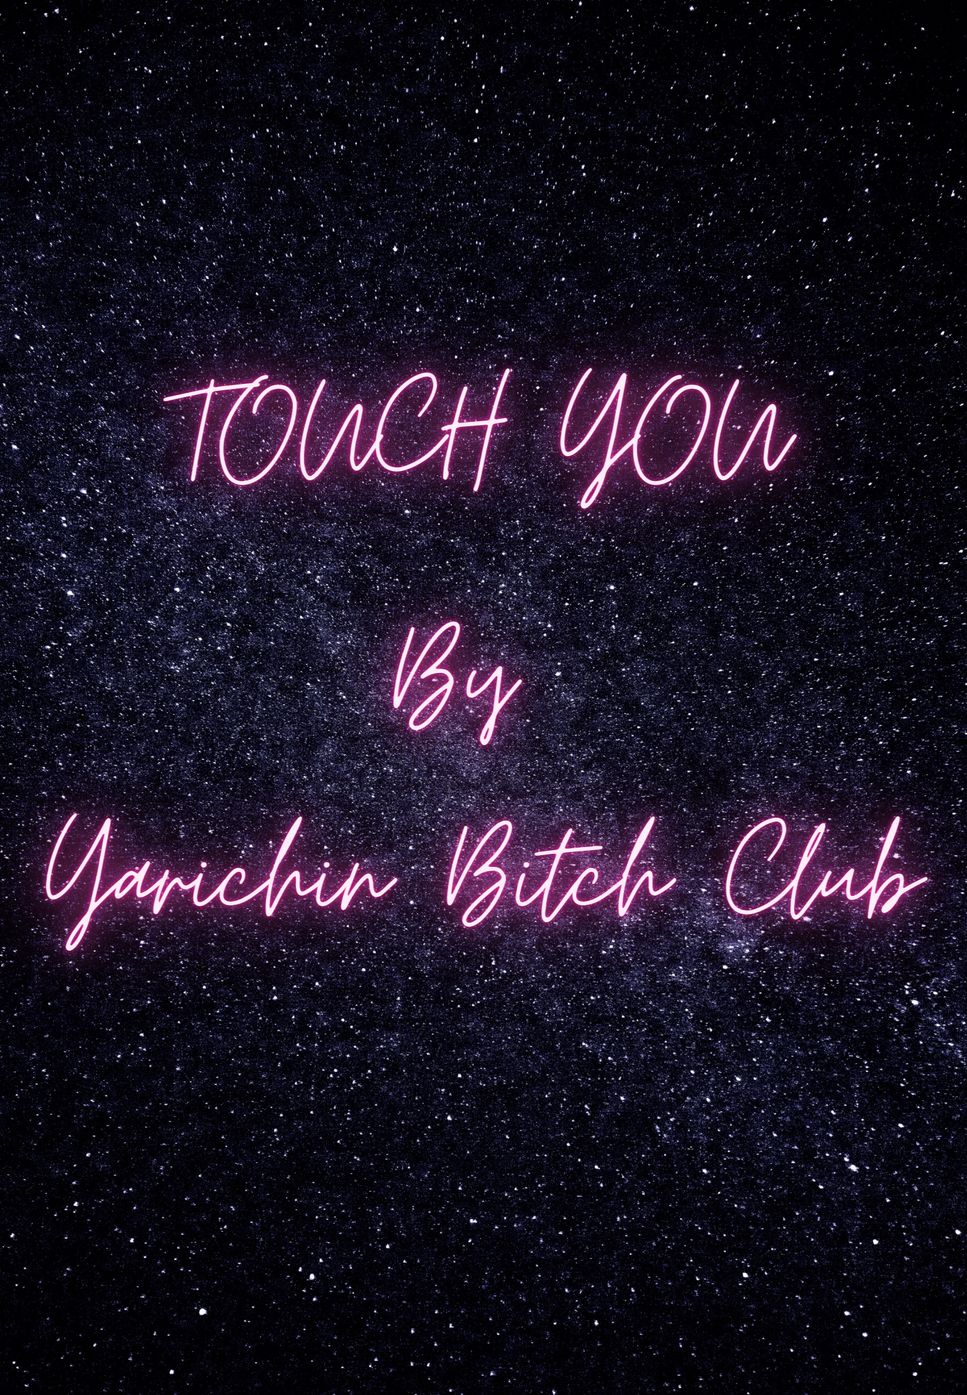 Yarichin Bitch Club - Touch You (ヤリチン☆ビッチ部) by Esther